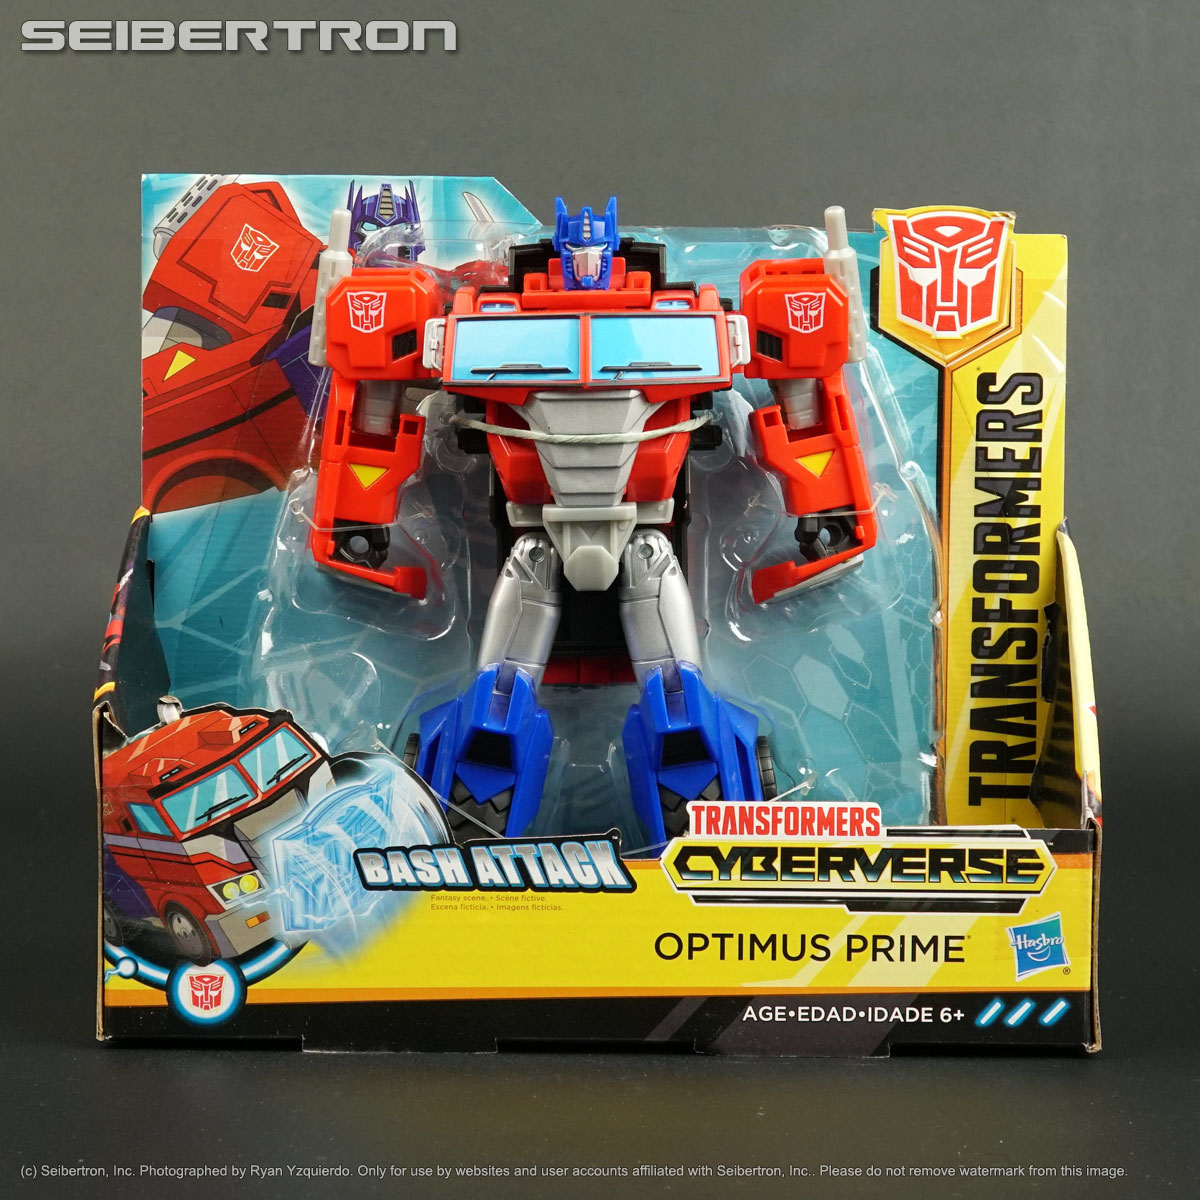 BASH ATTACK OPTIMUS PRIME Transformers Cyberverse Adventures Ultra 2019 New